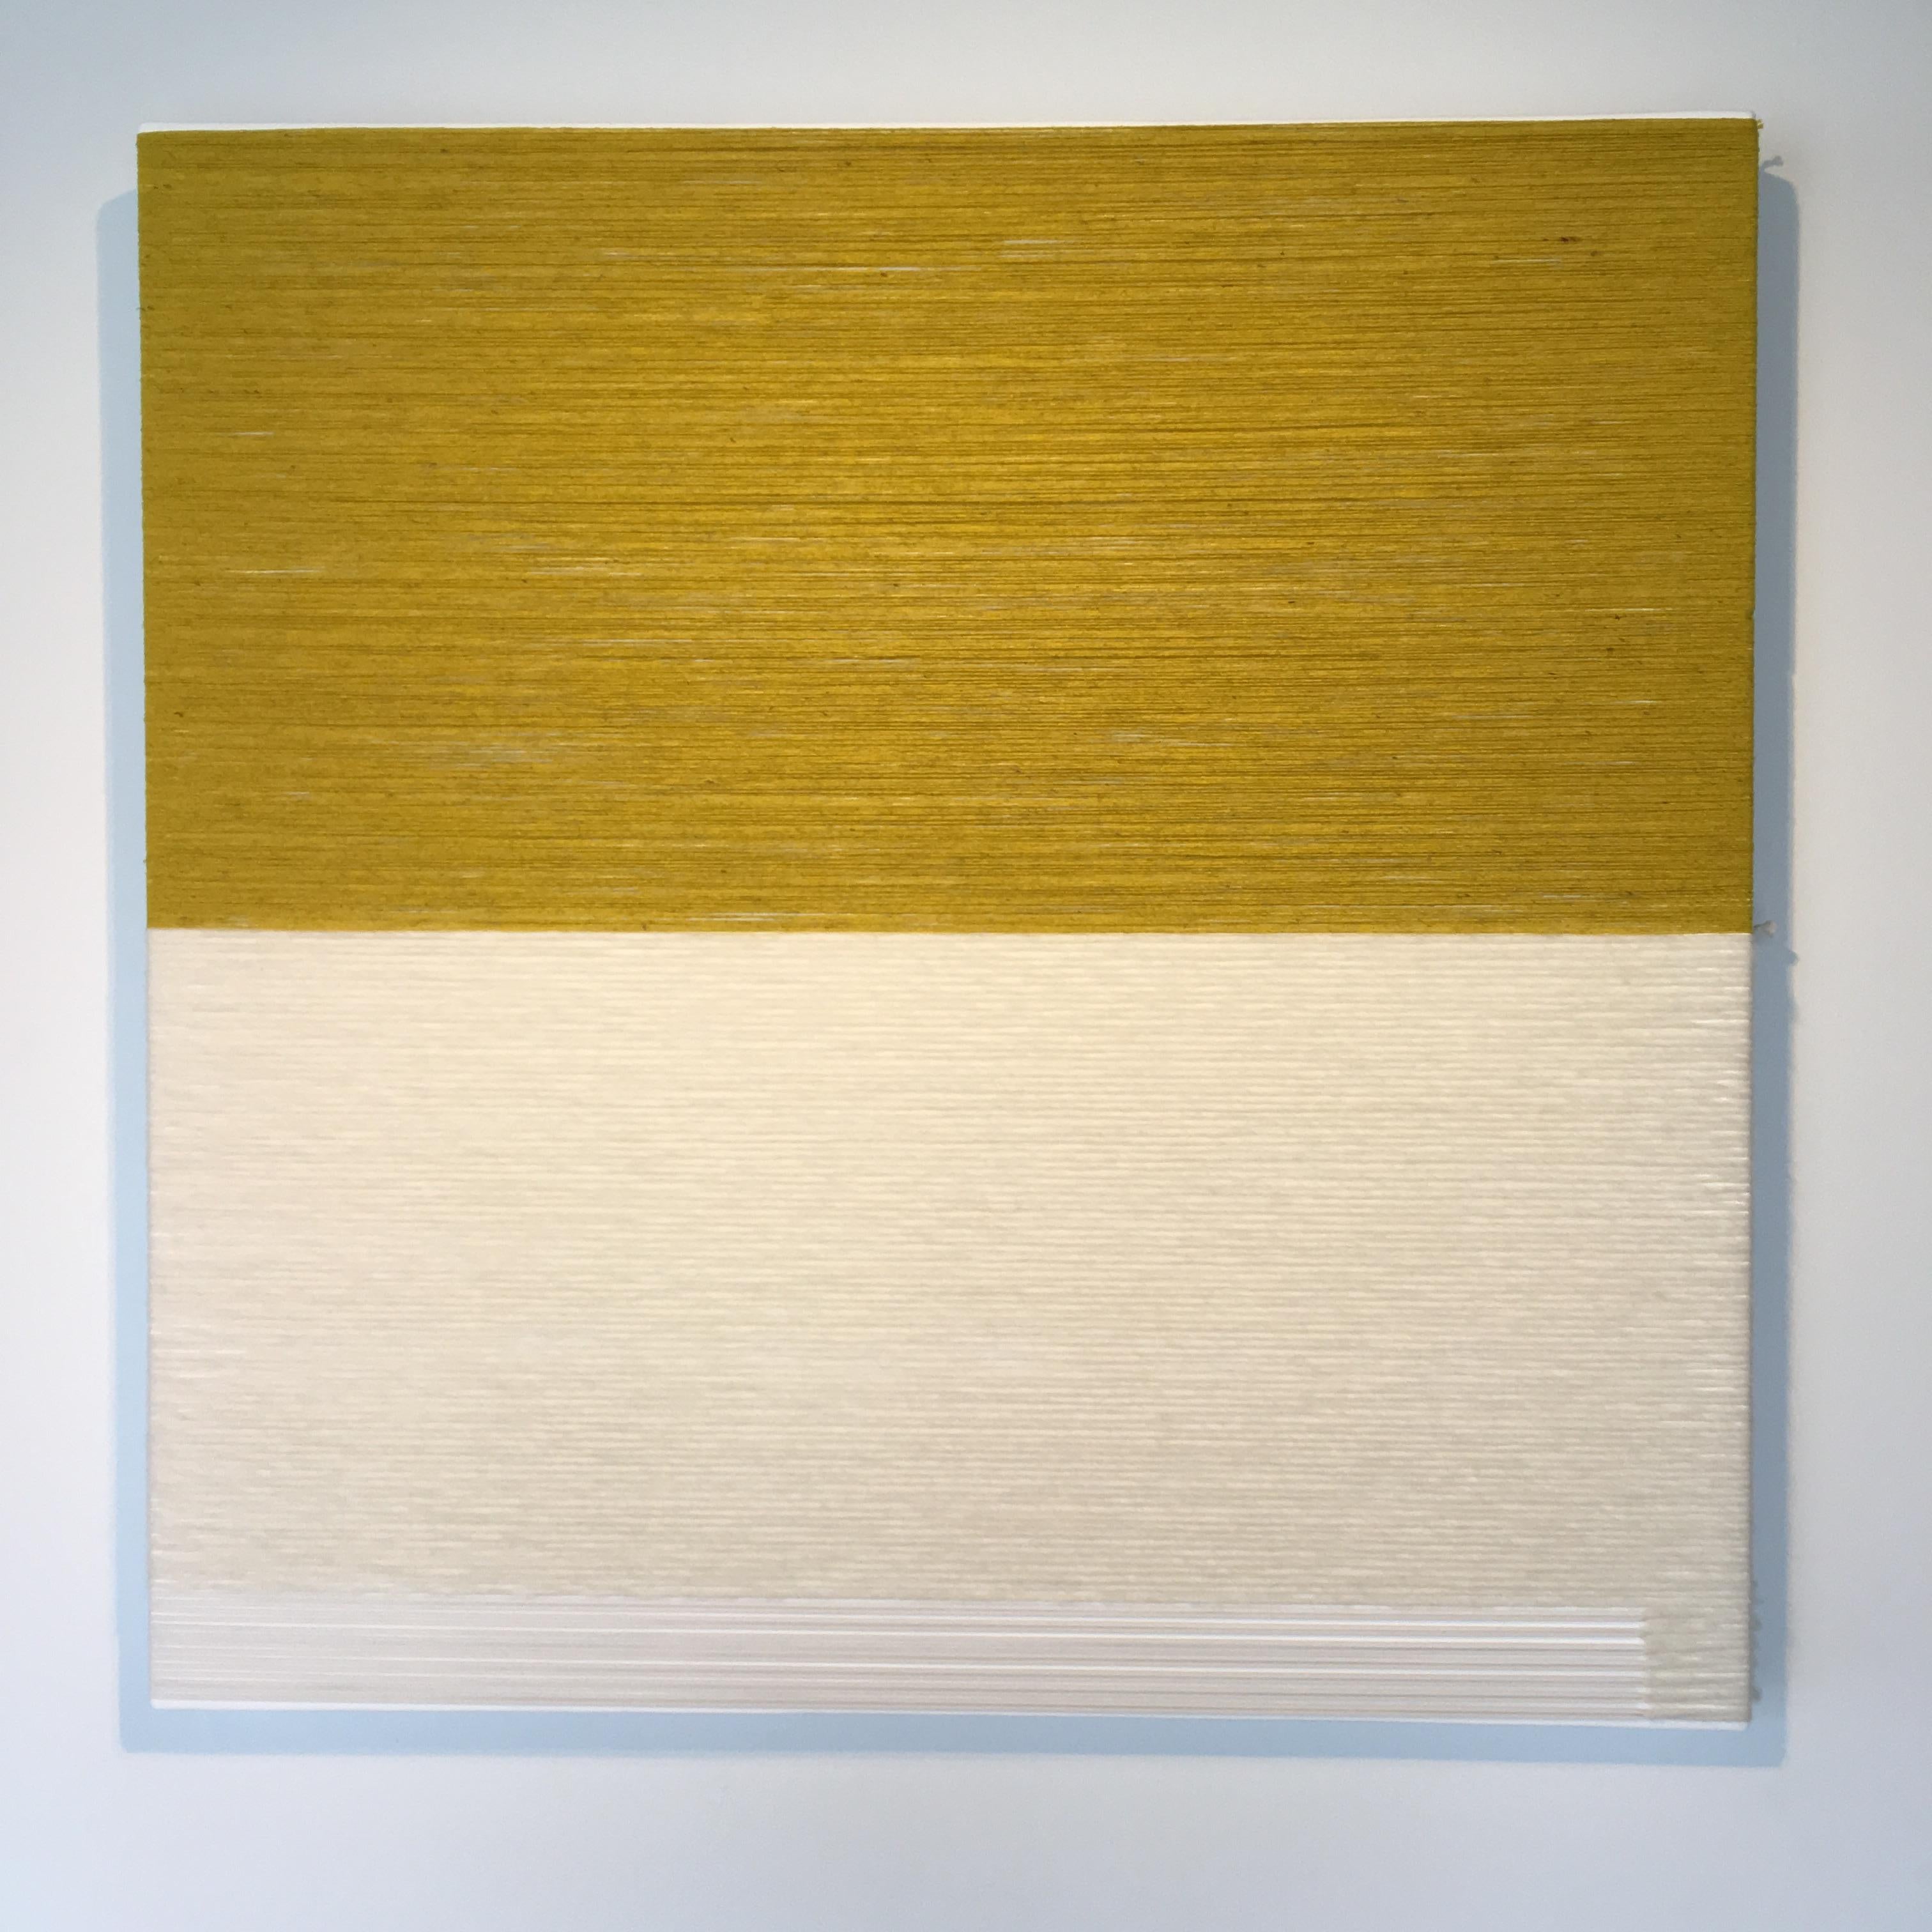 CONTEMPORARY TEXTILE ART, Minimalist, Raw Mexican Wool, Yellow and Beige, 2019 - Art by Marco Querin